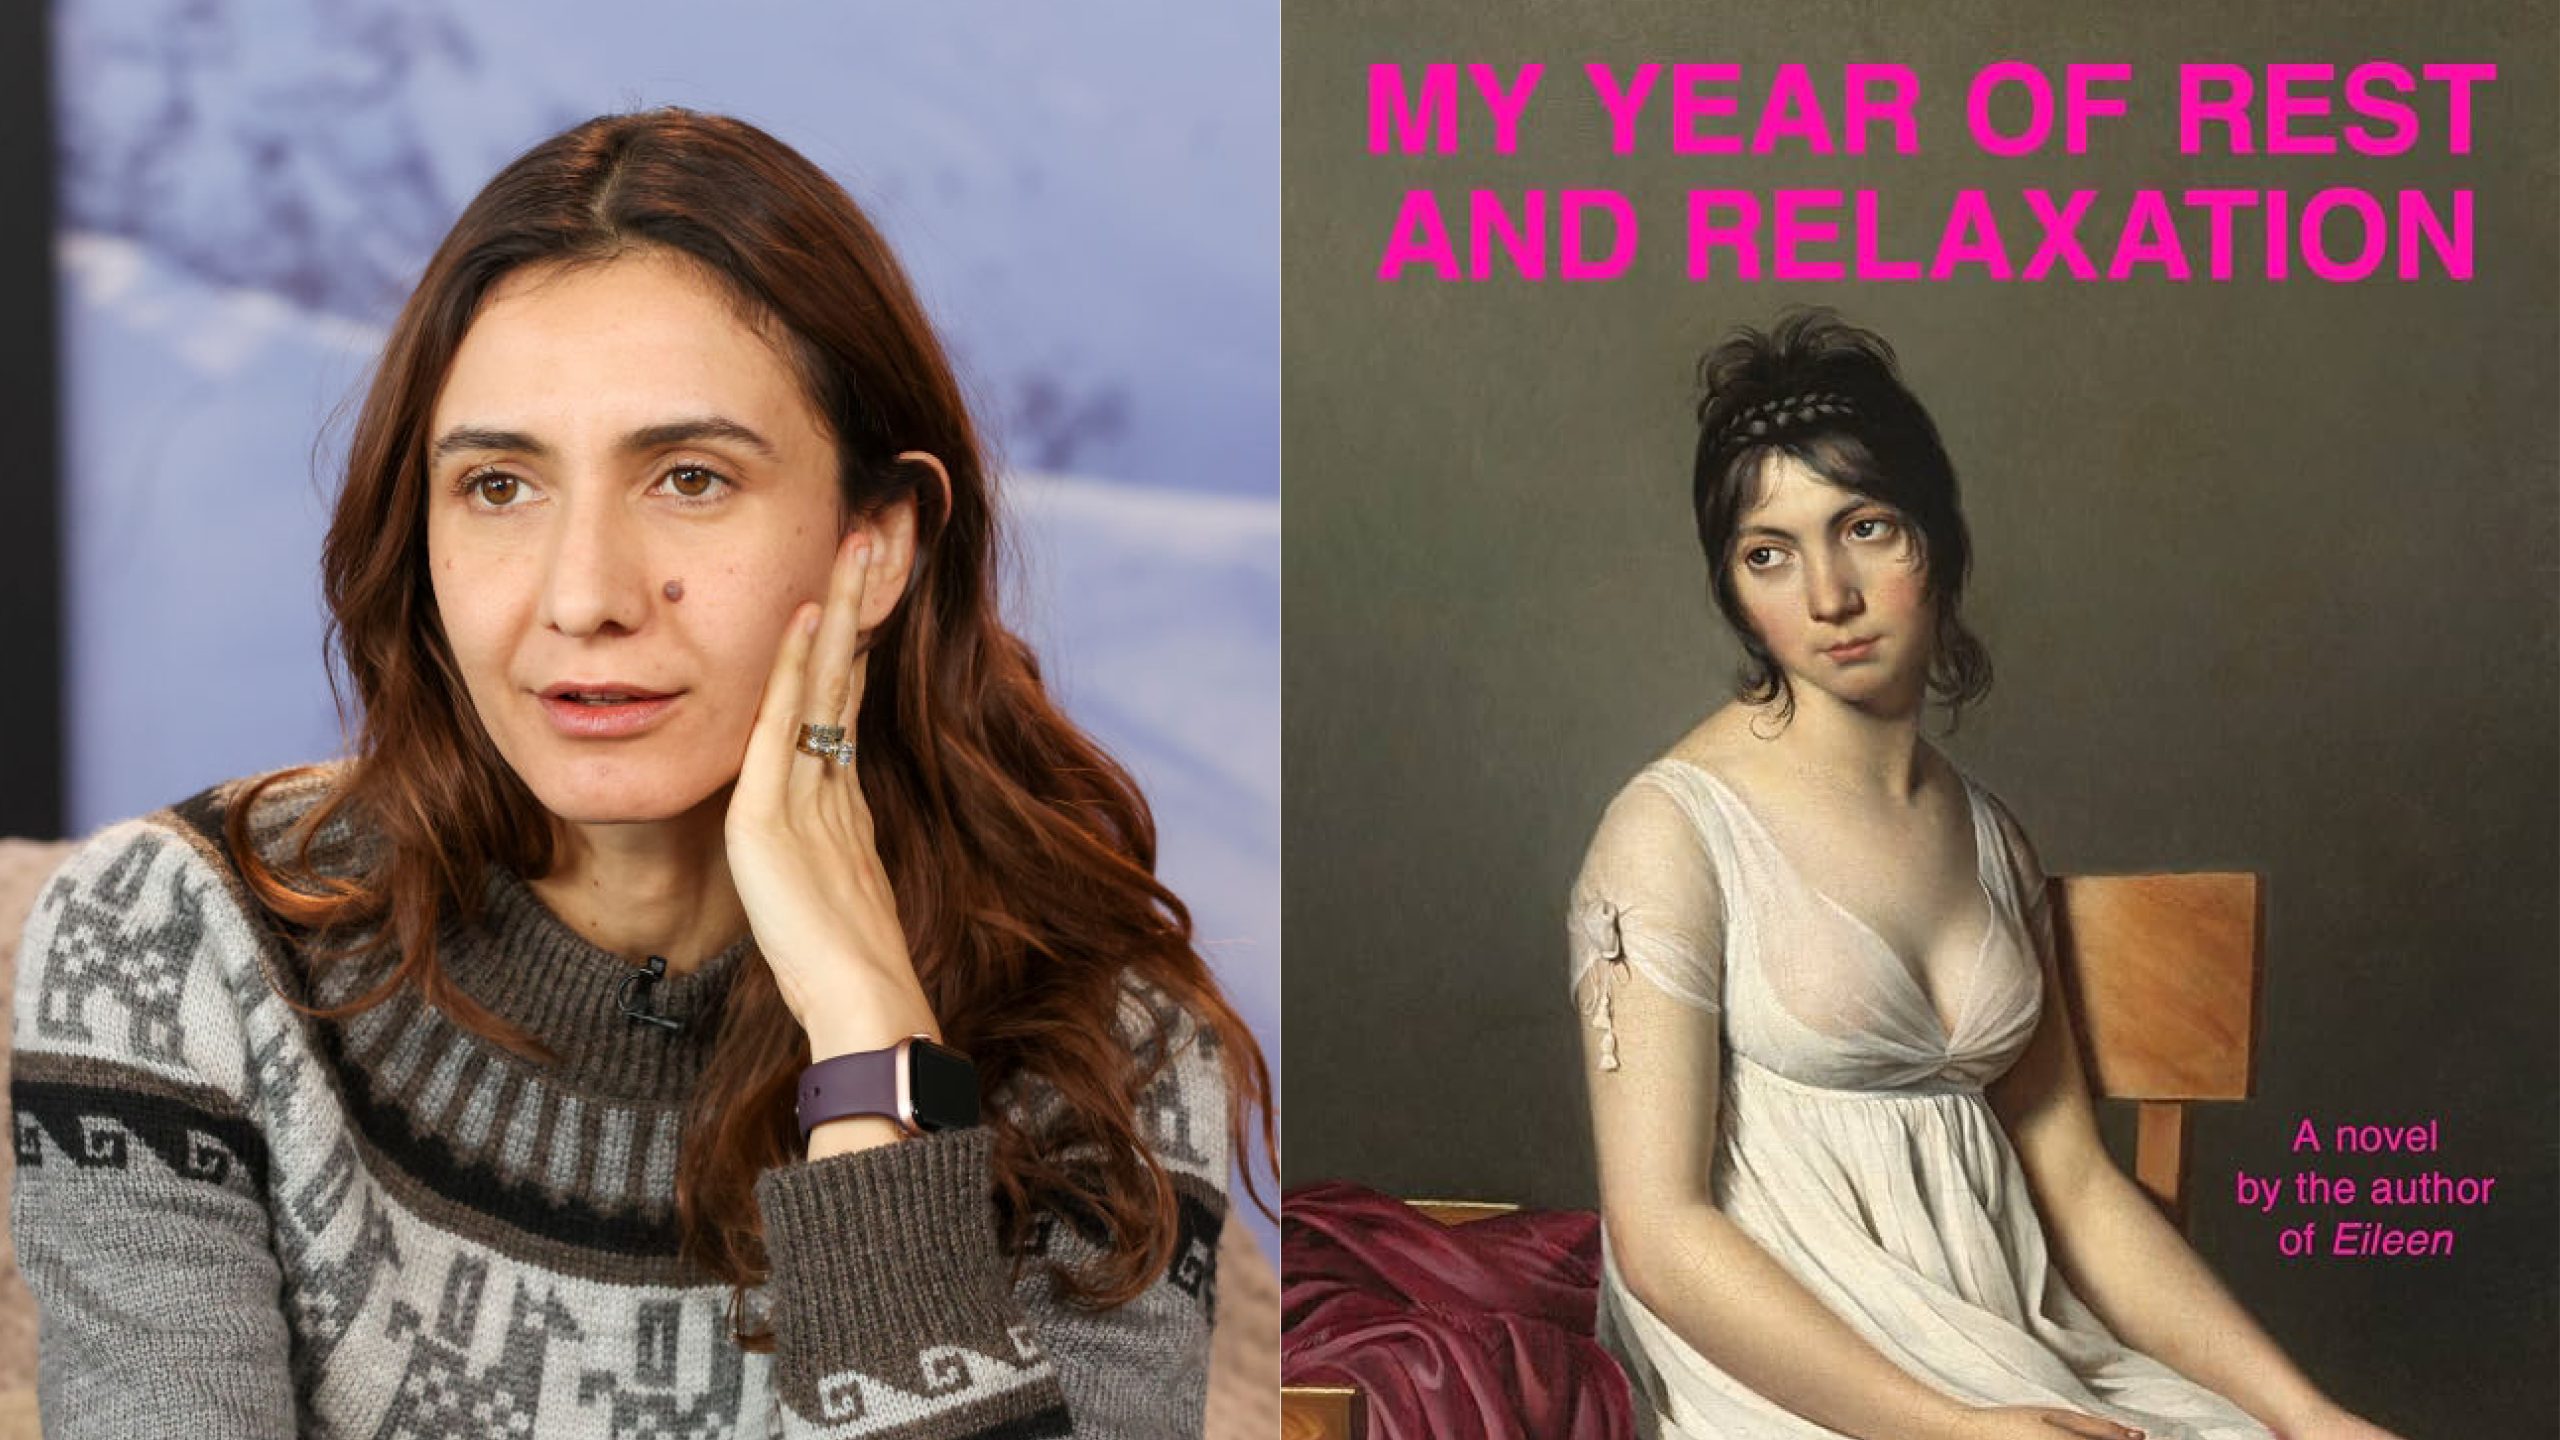 Ottessa Moshfegh Says ‘My Year of Rest and Relaxation’ Film Adaptation Is ‘Still Underway’